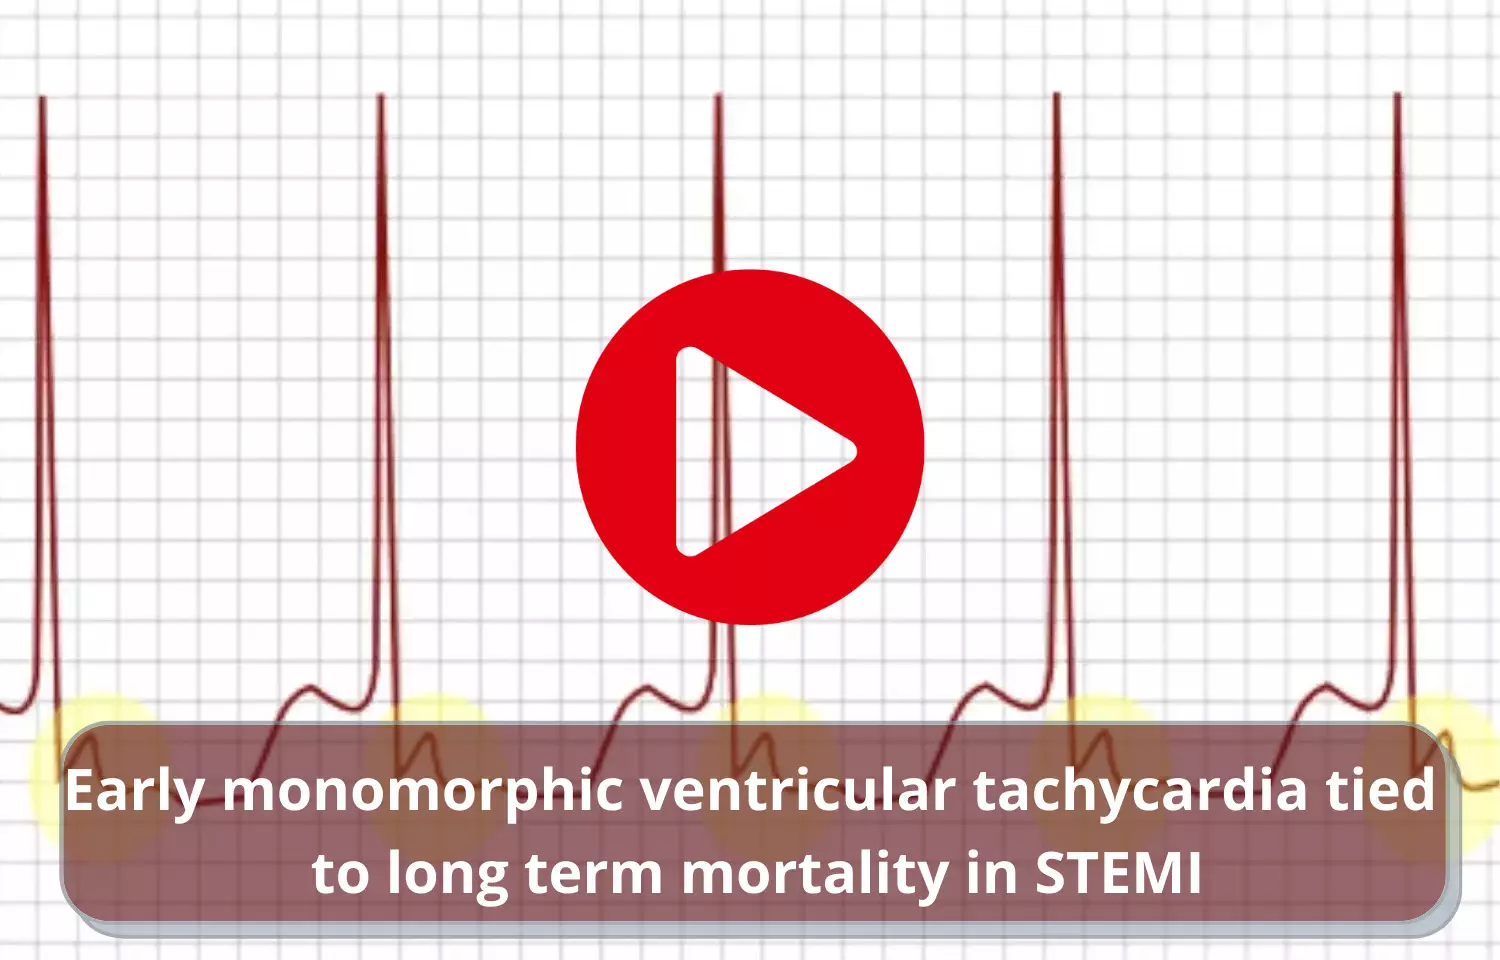 Early monomorphic ventricular tachycardia tied to long term mortality in STEMI